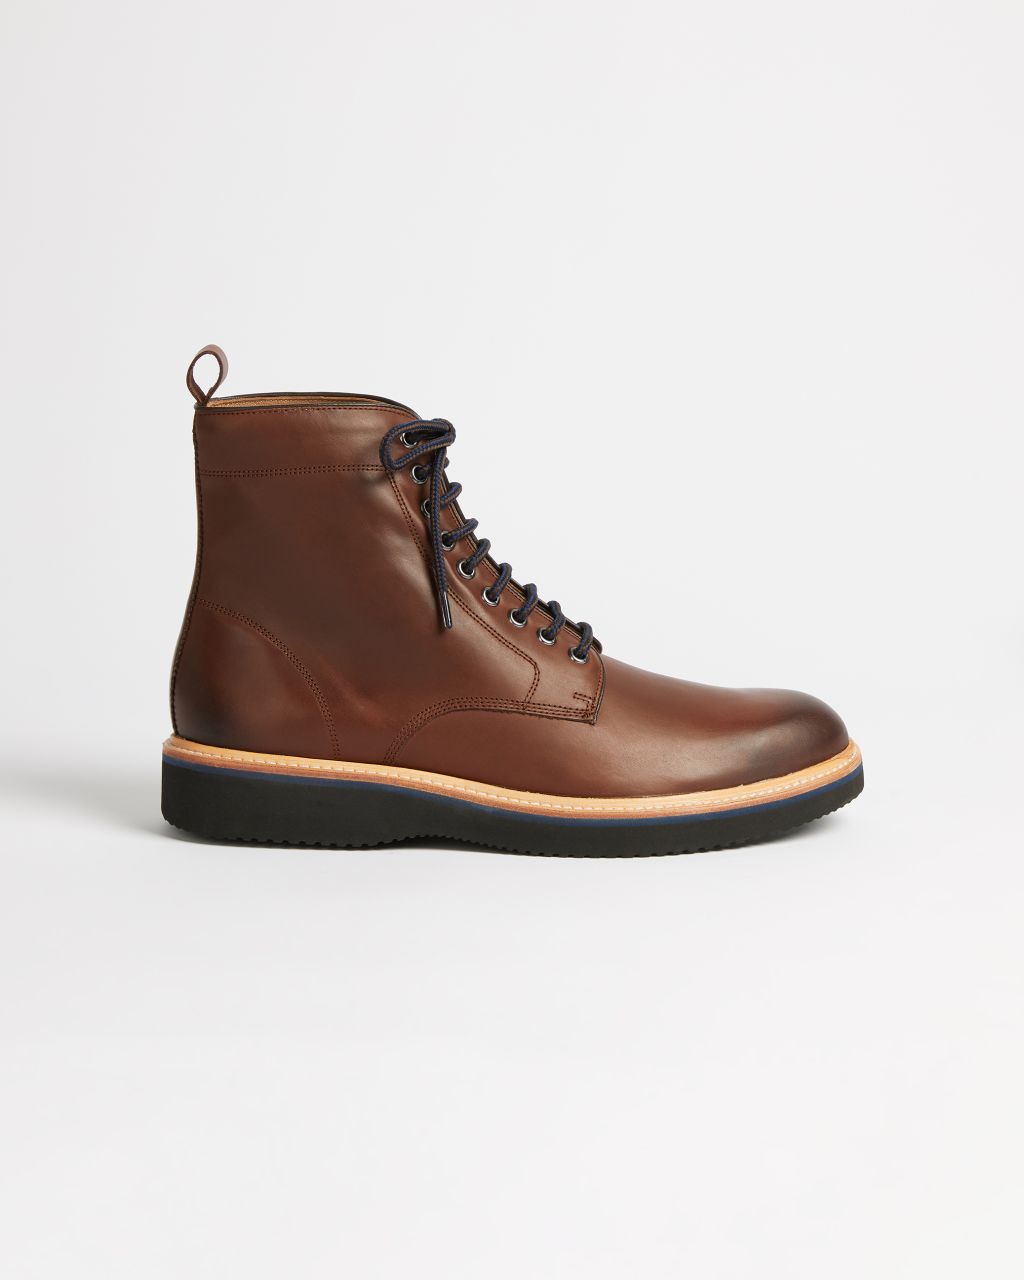 Ted Baker Men's Wedge Sole Derby Boot in Brown, Linton, Leather